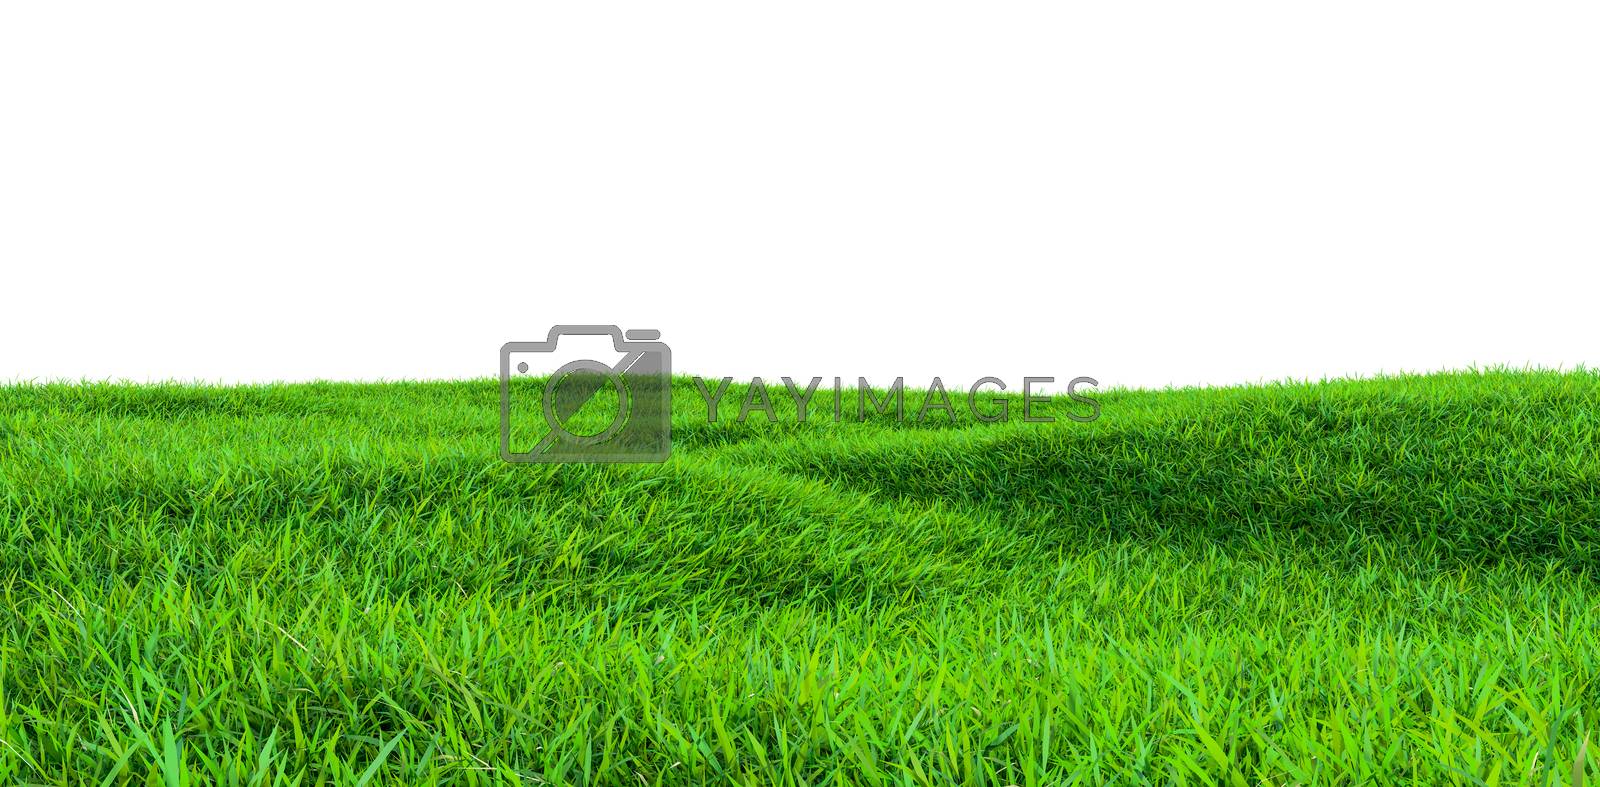 Royalty free image of Green grass field isolated on white background by cherezoff